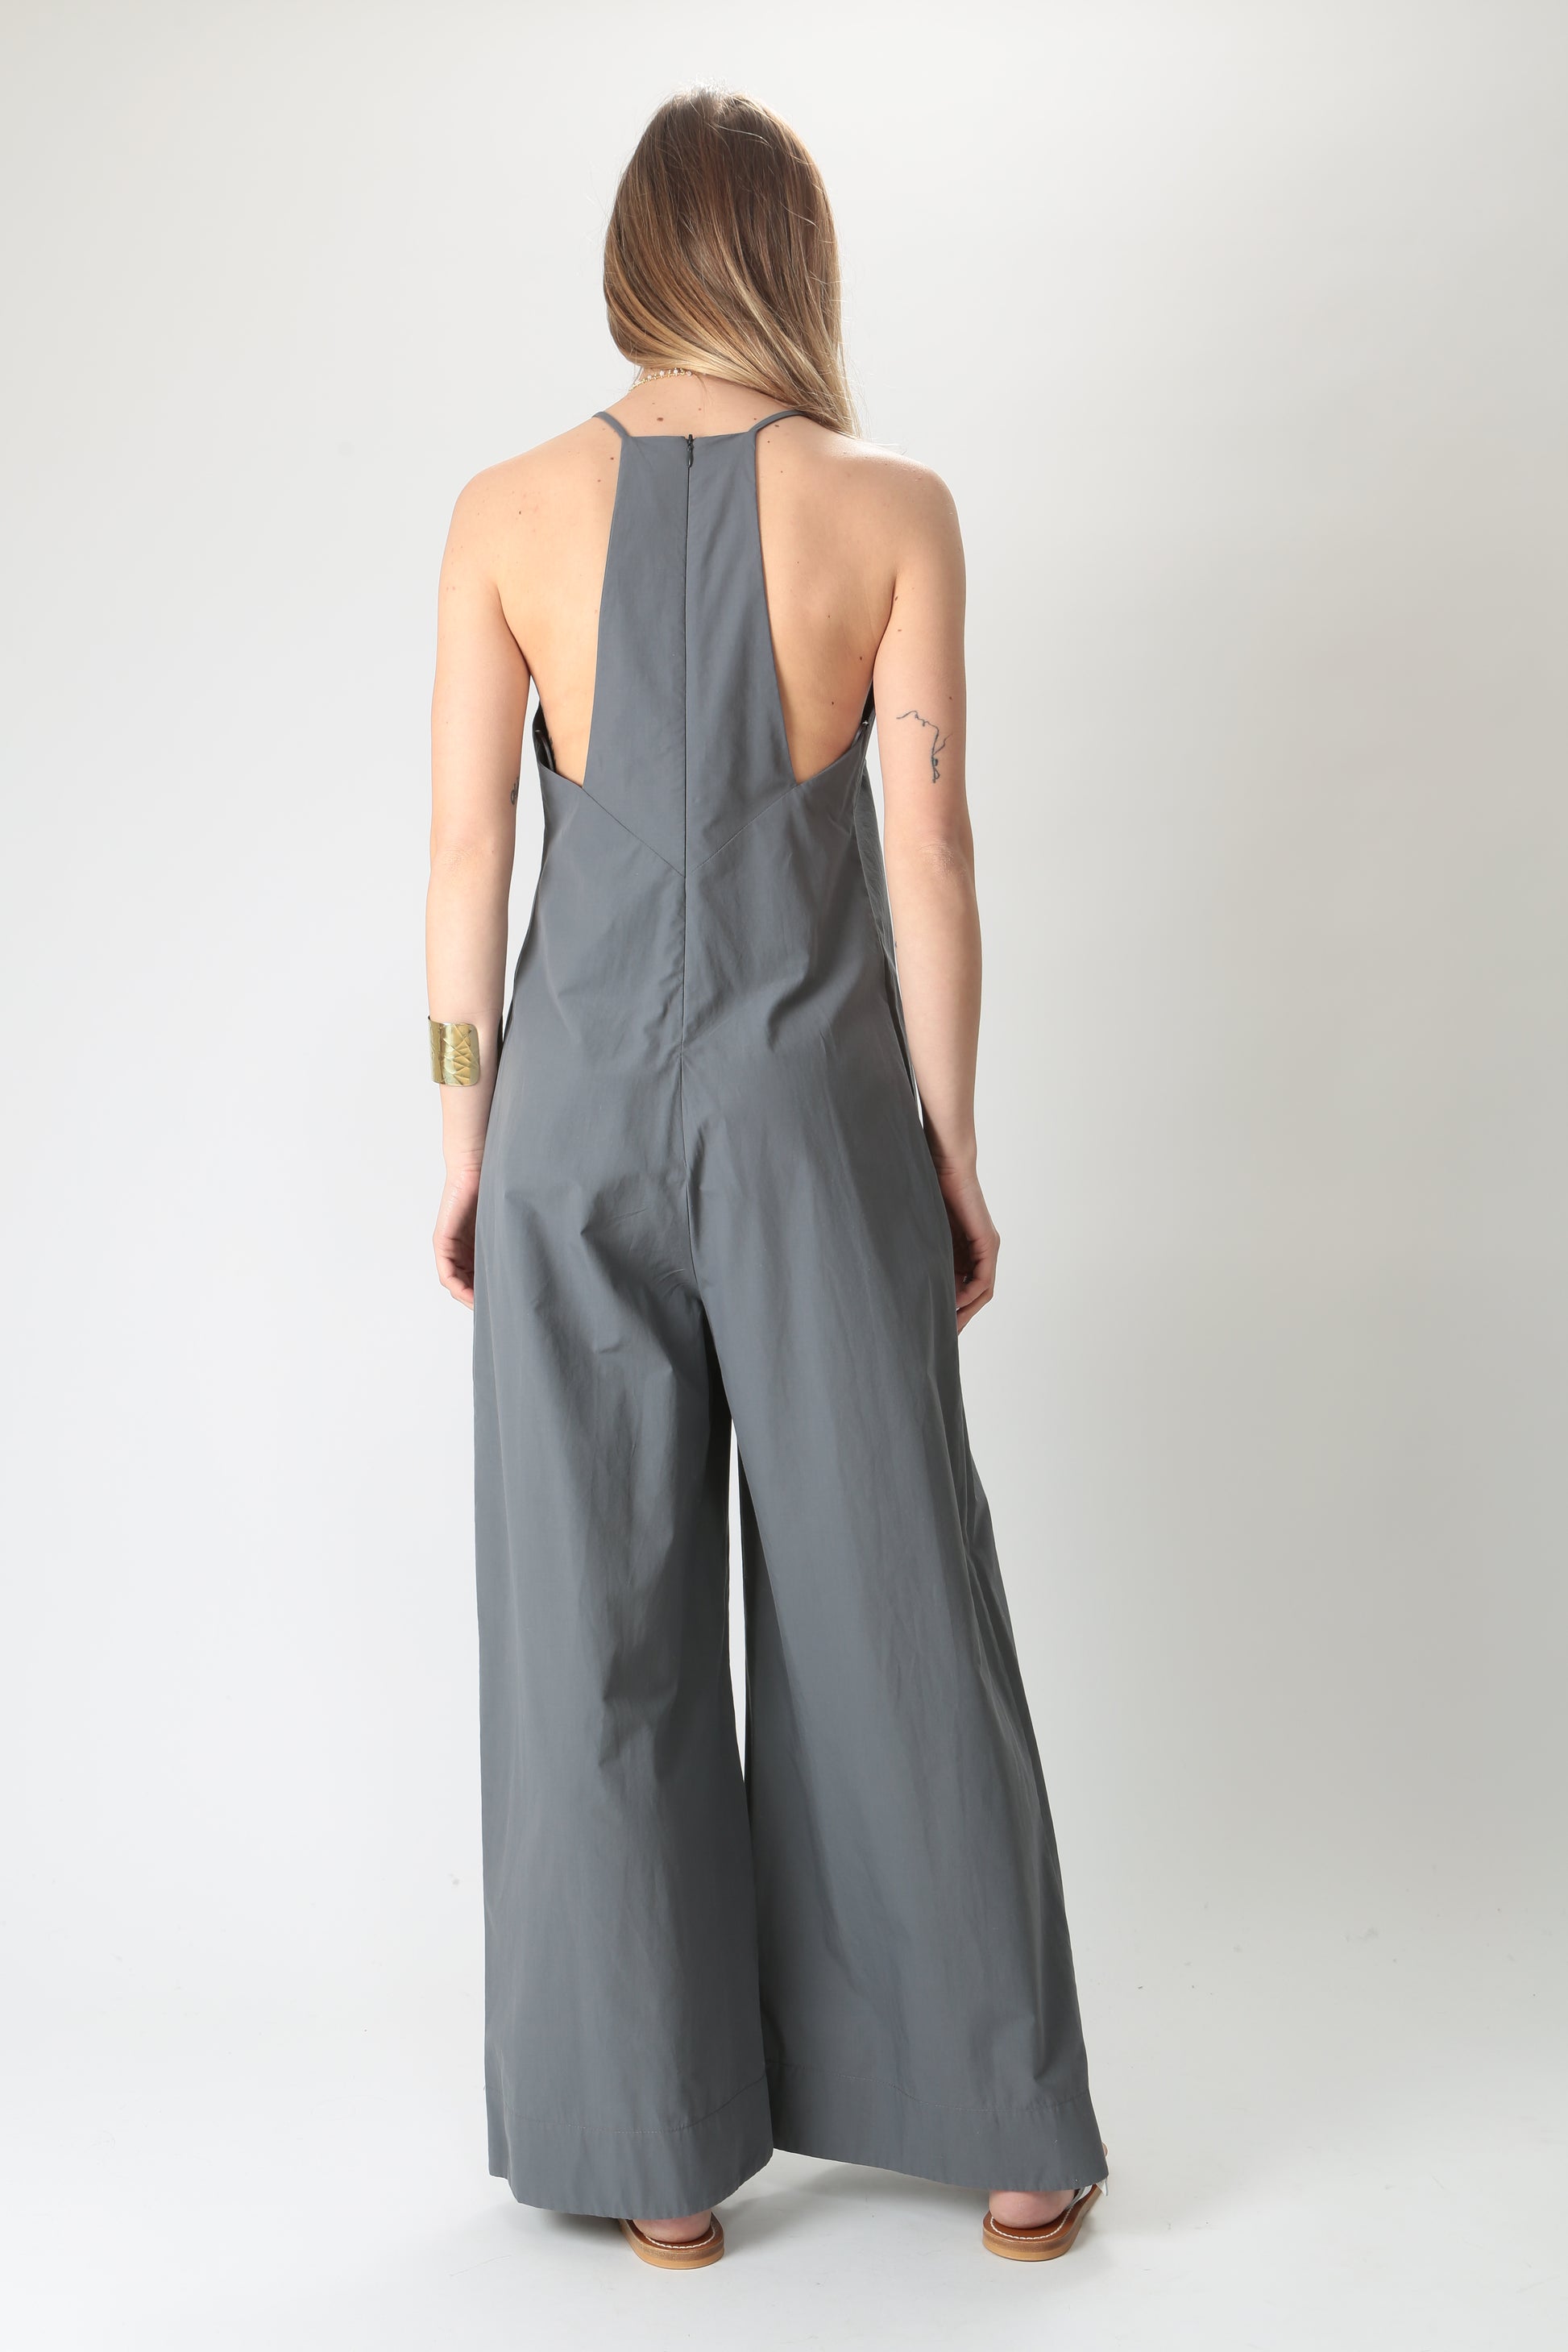 https://admin.shopify.com/store/gulieshop/products/9173199618397#:~:text=Invia-,Ottod%27ame%20Jumpsuit%20in%20cotone%20DP9475,-Contenuto%20multimediale%201